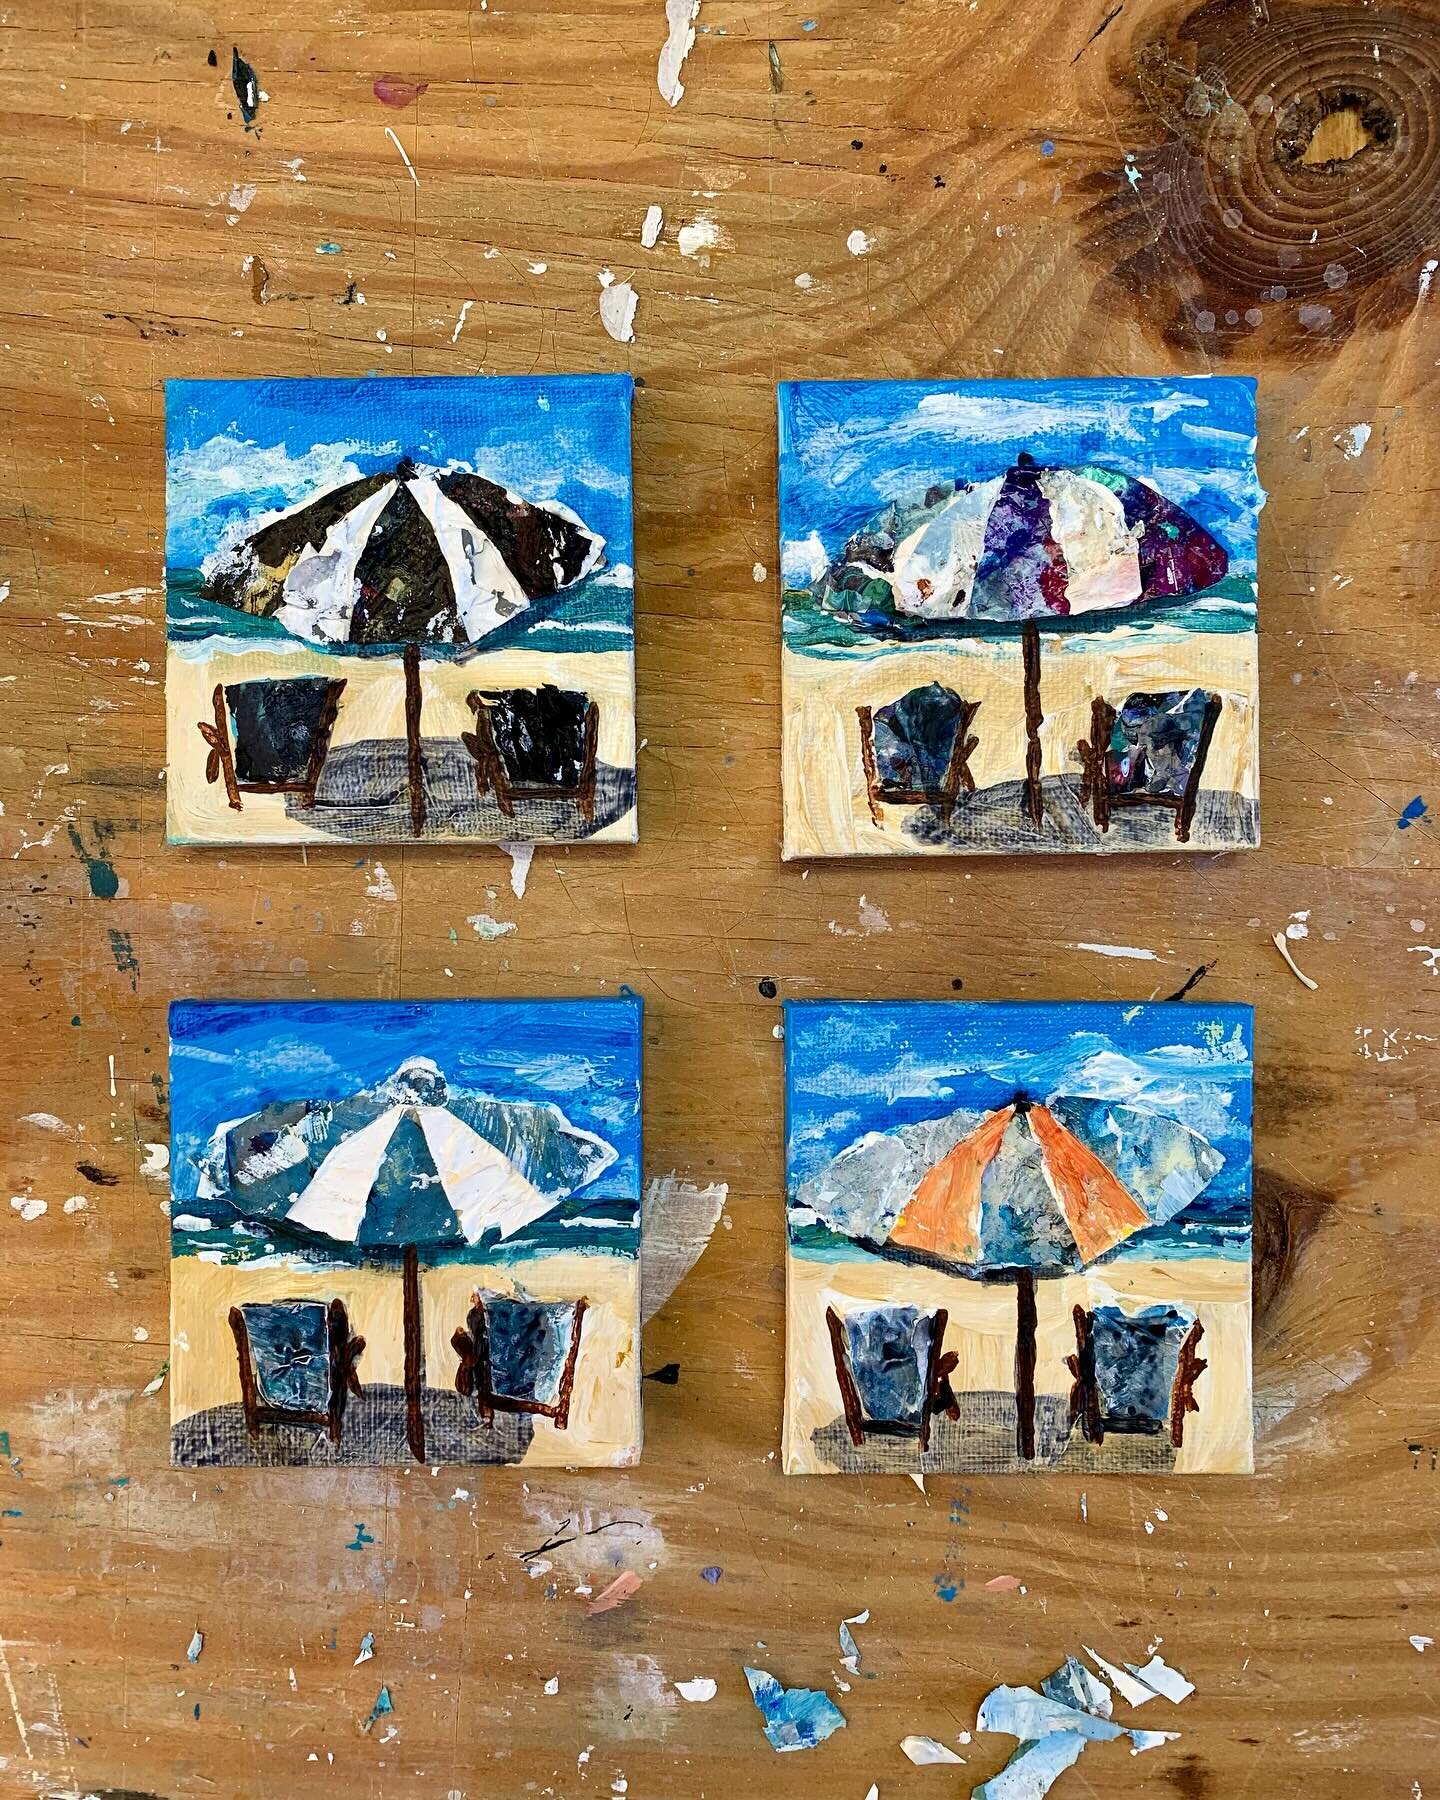 Completed a few mini canvas Paint Mosaic. Made these for small easels. Stay tuned...
.
#cirwindesign #chrisirwin #miniart #instaartist #originalart #newart #abstractart #reuse #art #acrylicpaintingoncanvas #marylandartist #maryland #fineart #crab #mo